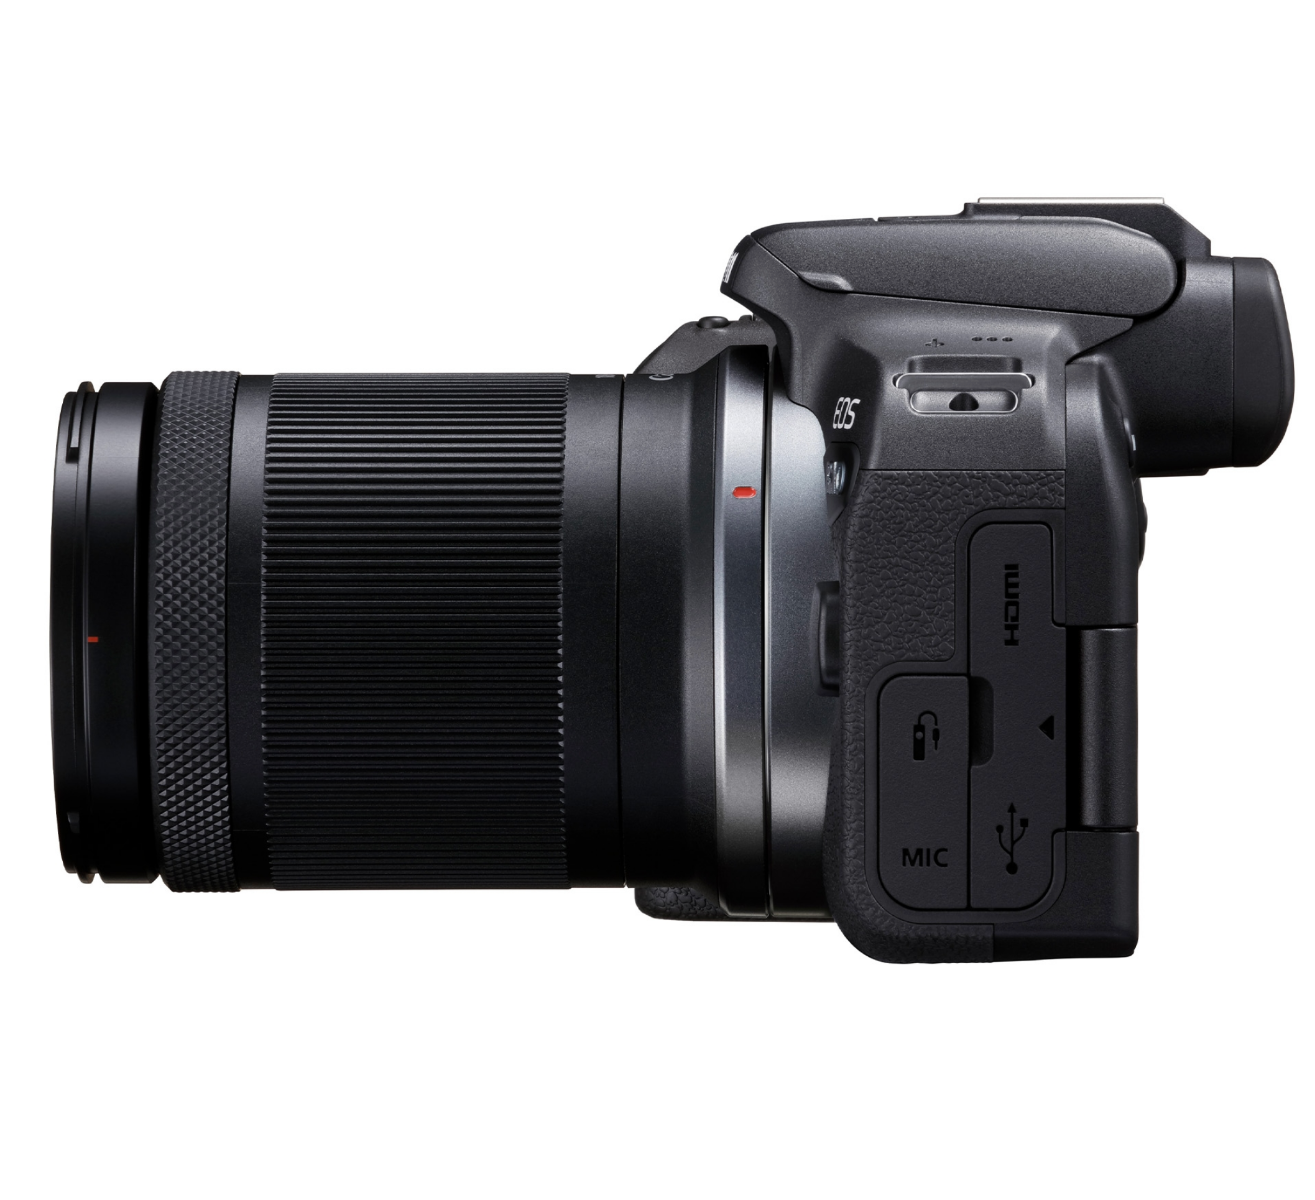 Canon EOS R10 Mirrorless Camera + RF-S 18-150mm F3.5-6.3 IS STM Lens Kit - Product Photo 2 - Side view of the camera with the lens attached and input / output ports visible